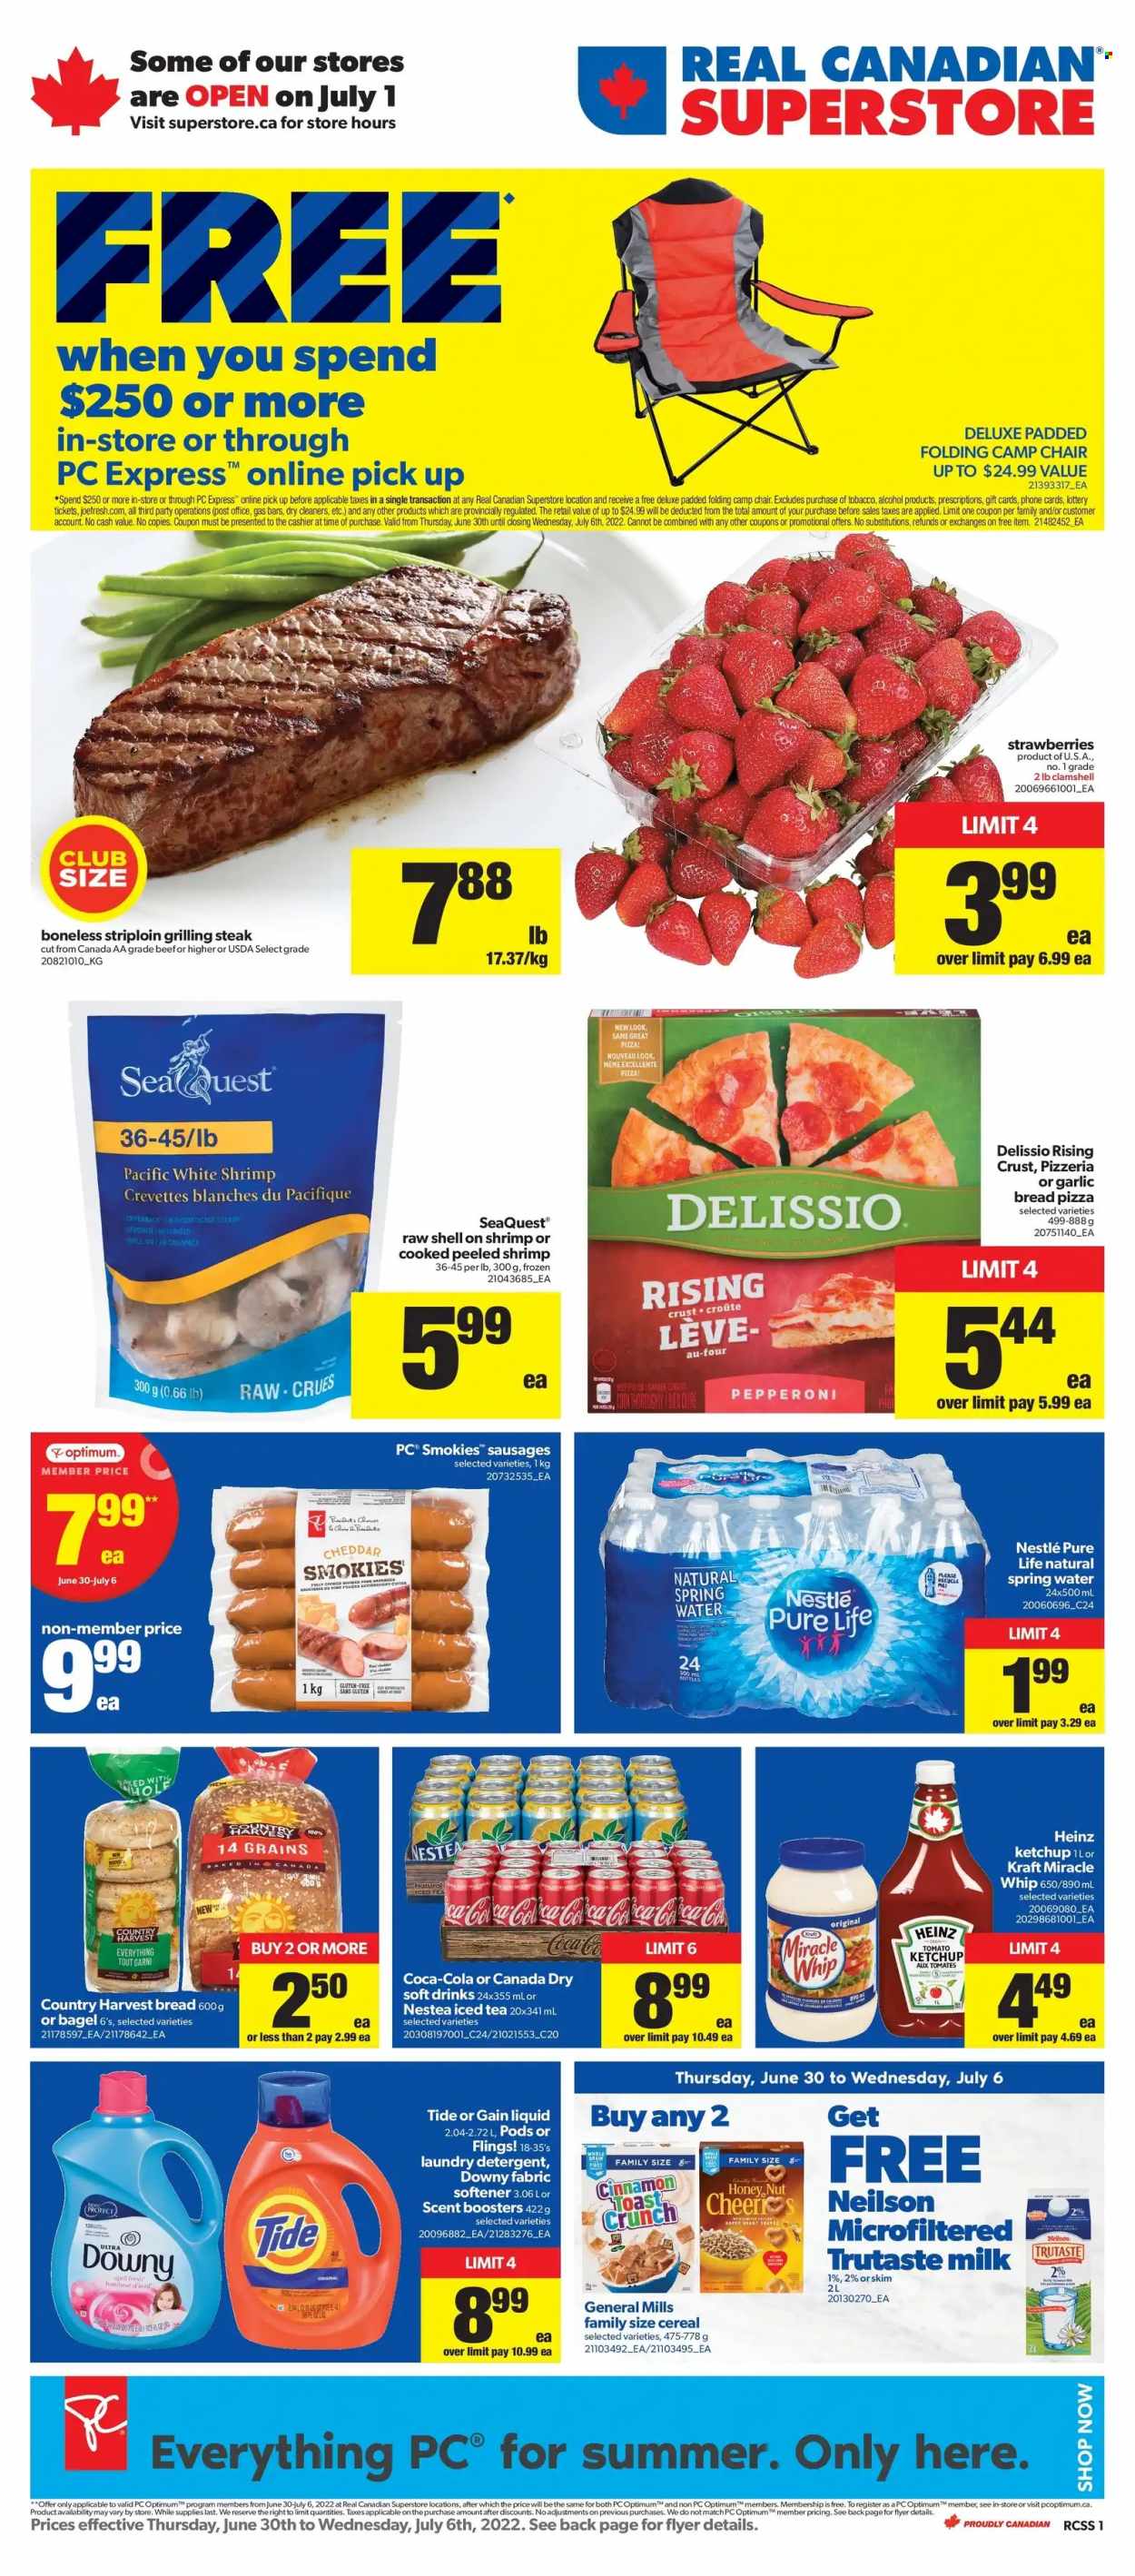 thumbnail - Real Canadian Superstore Flyer - June 30, 2022 - July 06, 2022 - Sales products - chair, bagels, bread, strawberries, pizza, Kraft®, sausage, pepperoni, cheddar, Président, milk, Miracle Whip, Country Harvest, cereals, cinnamon, Canada Dry, Coca-Cola, ice tea, soft drink, spring water, L'Or, alcohol, Gain, Tide, fabric softener, laundry detergent, scent booster, Downy Laundry, fork, Optimum, detergent, Nestlé, Heinz, ketchup, steak. Page 1.